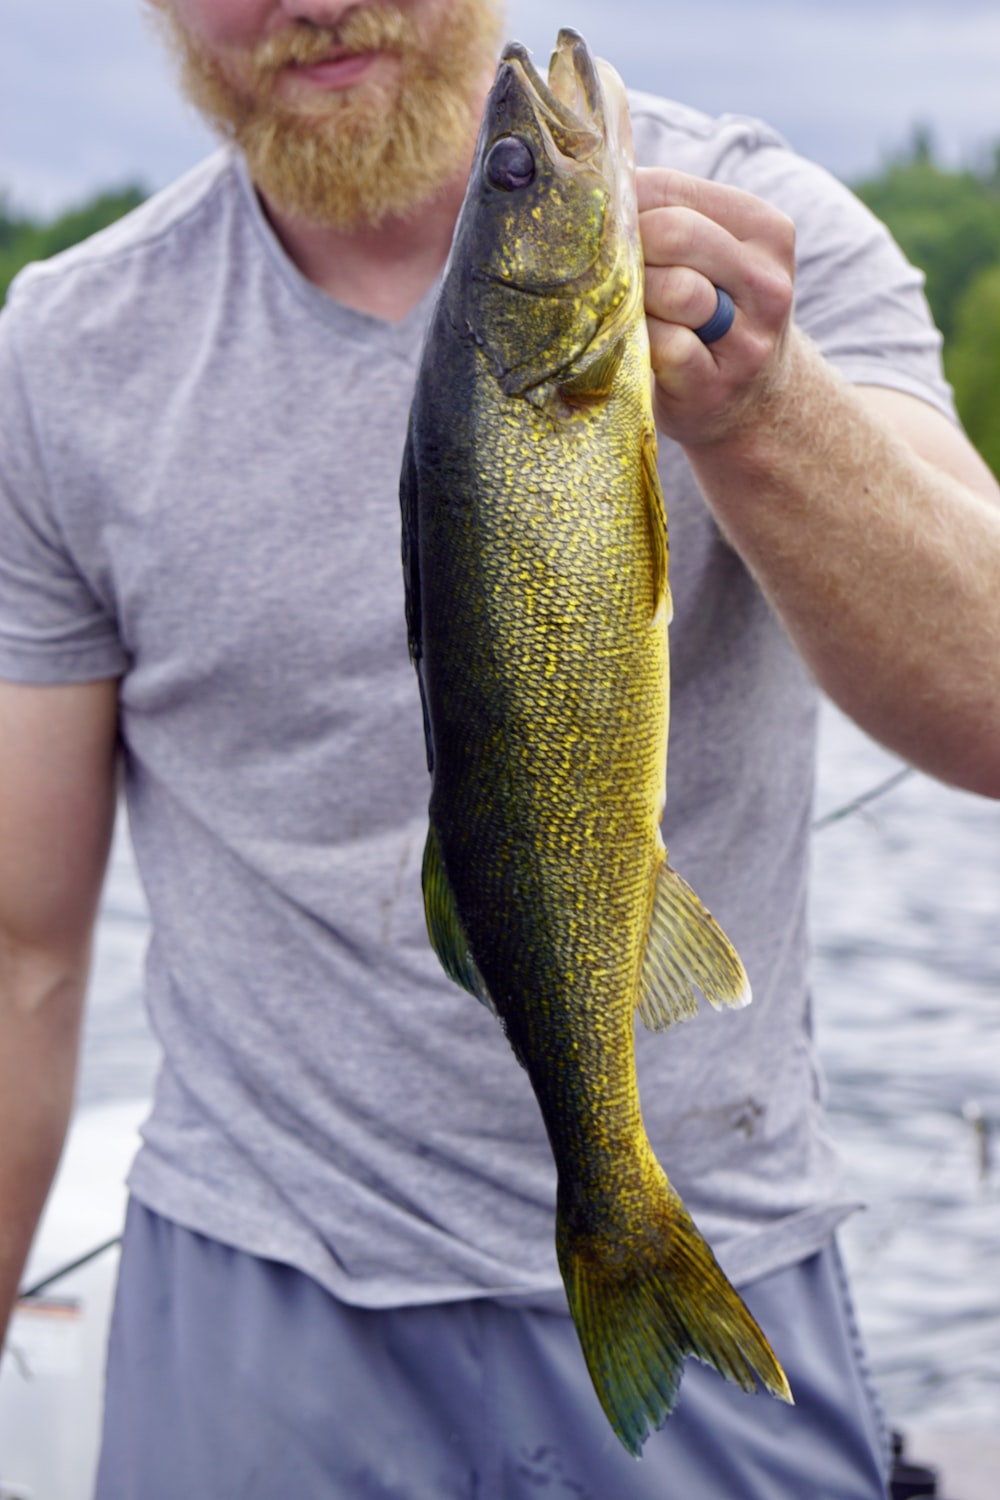 Walleye pictures download free images on